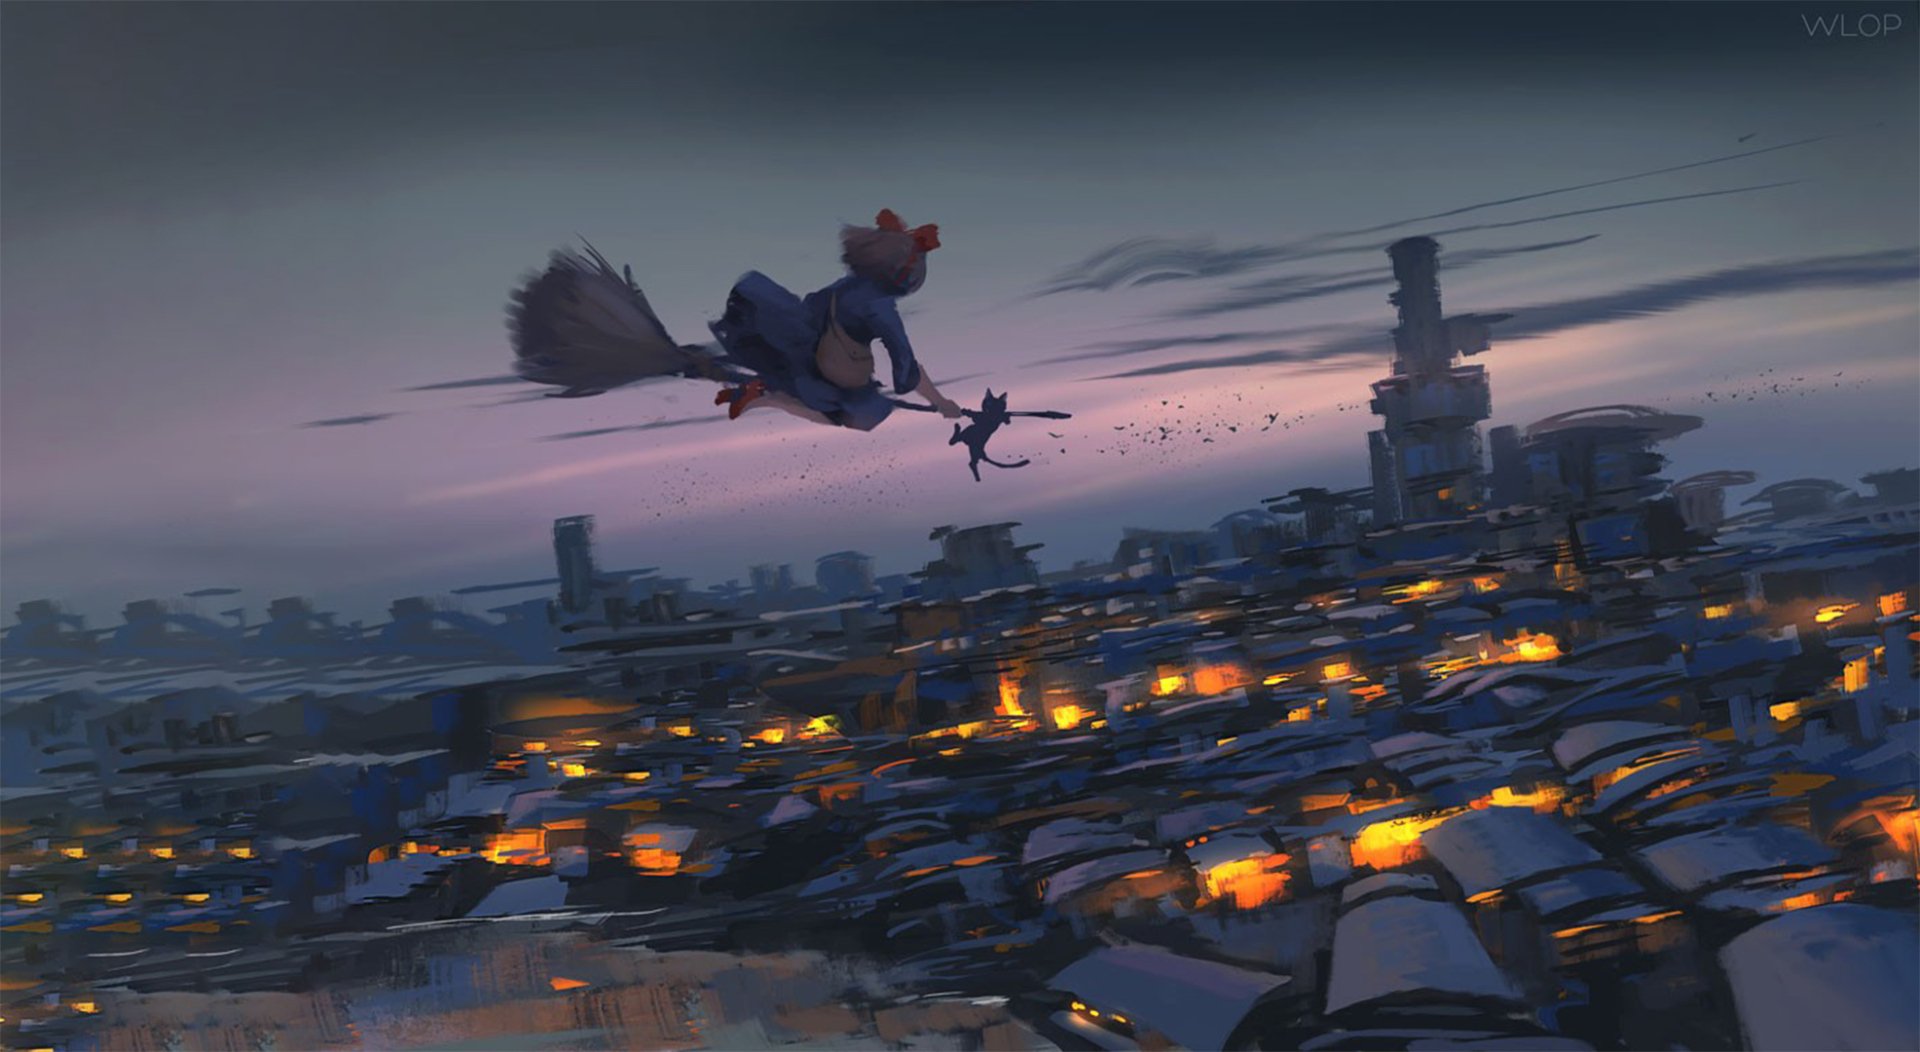 Anime Kiki's Delivery Service HD Wallpaper by Wang Ling